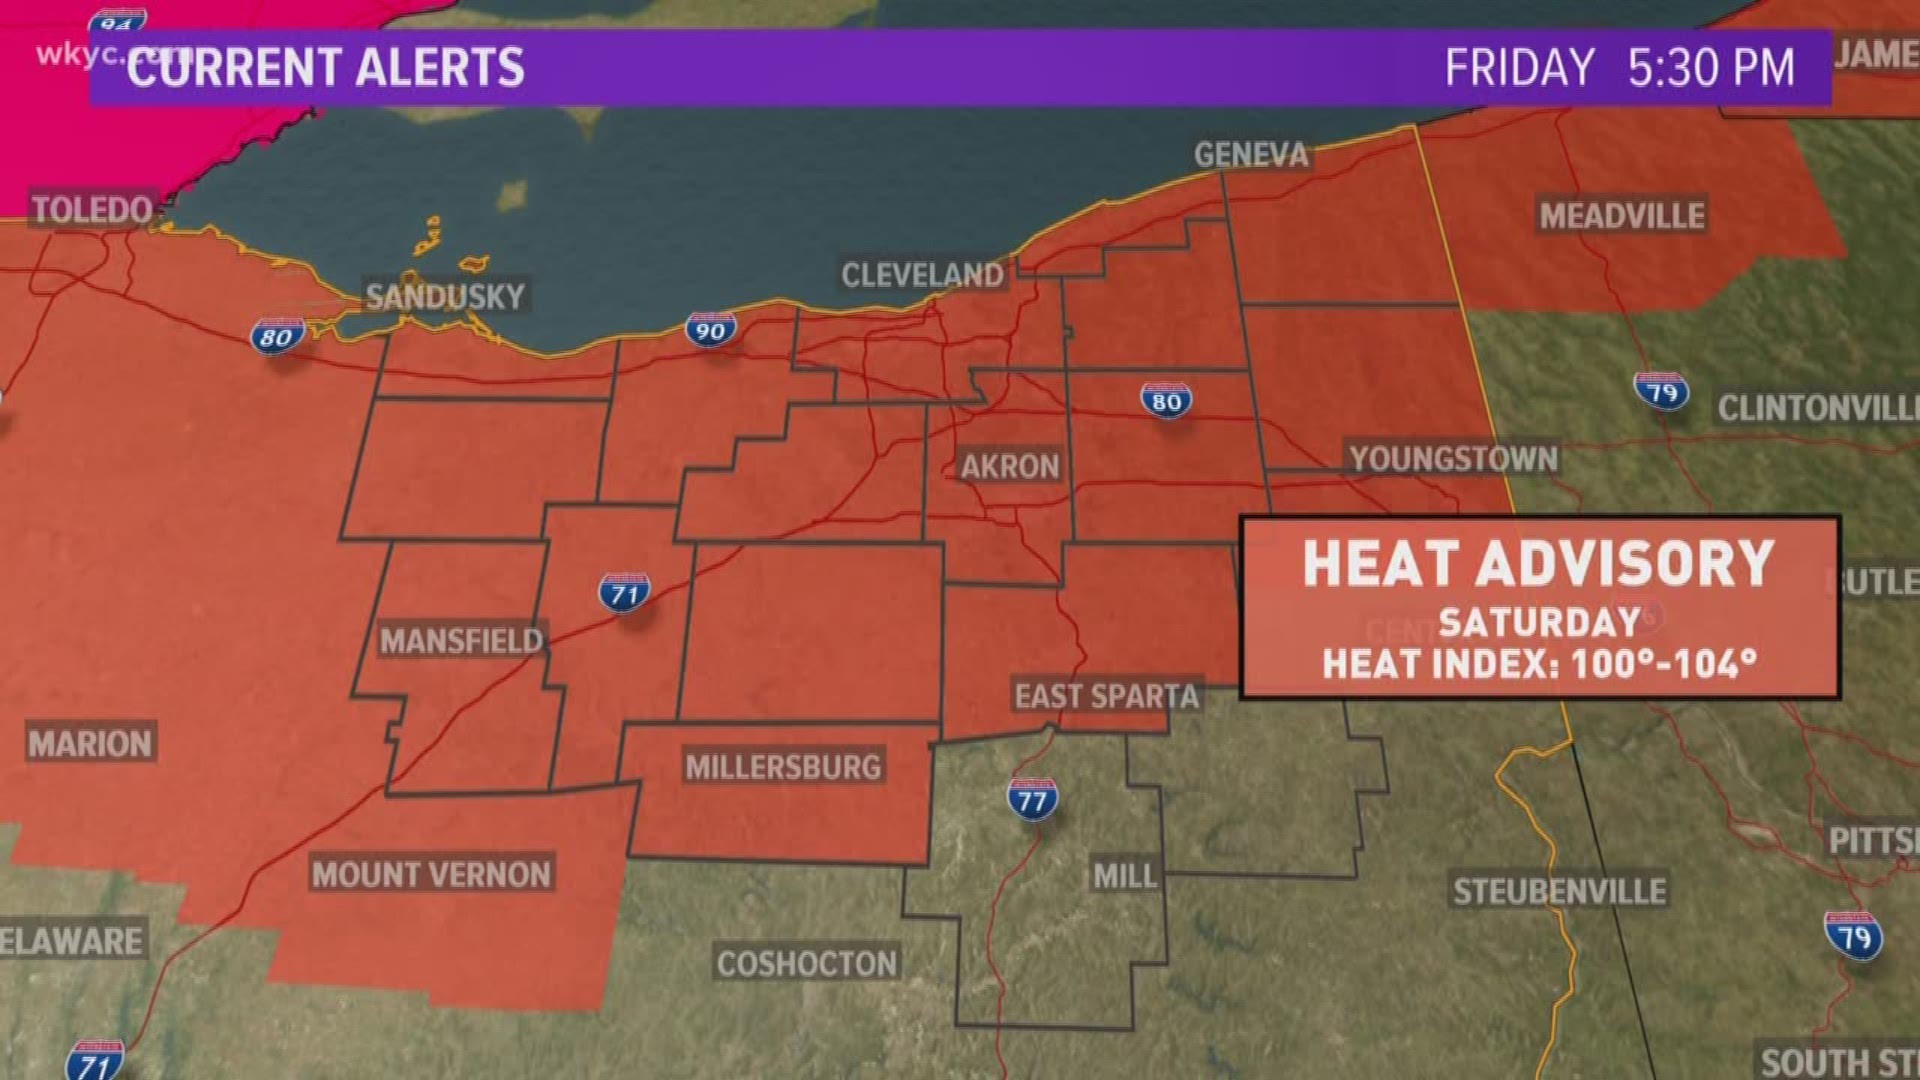 Heat Advisory issued: Heat indexes could hit 105�